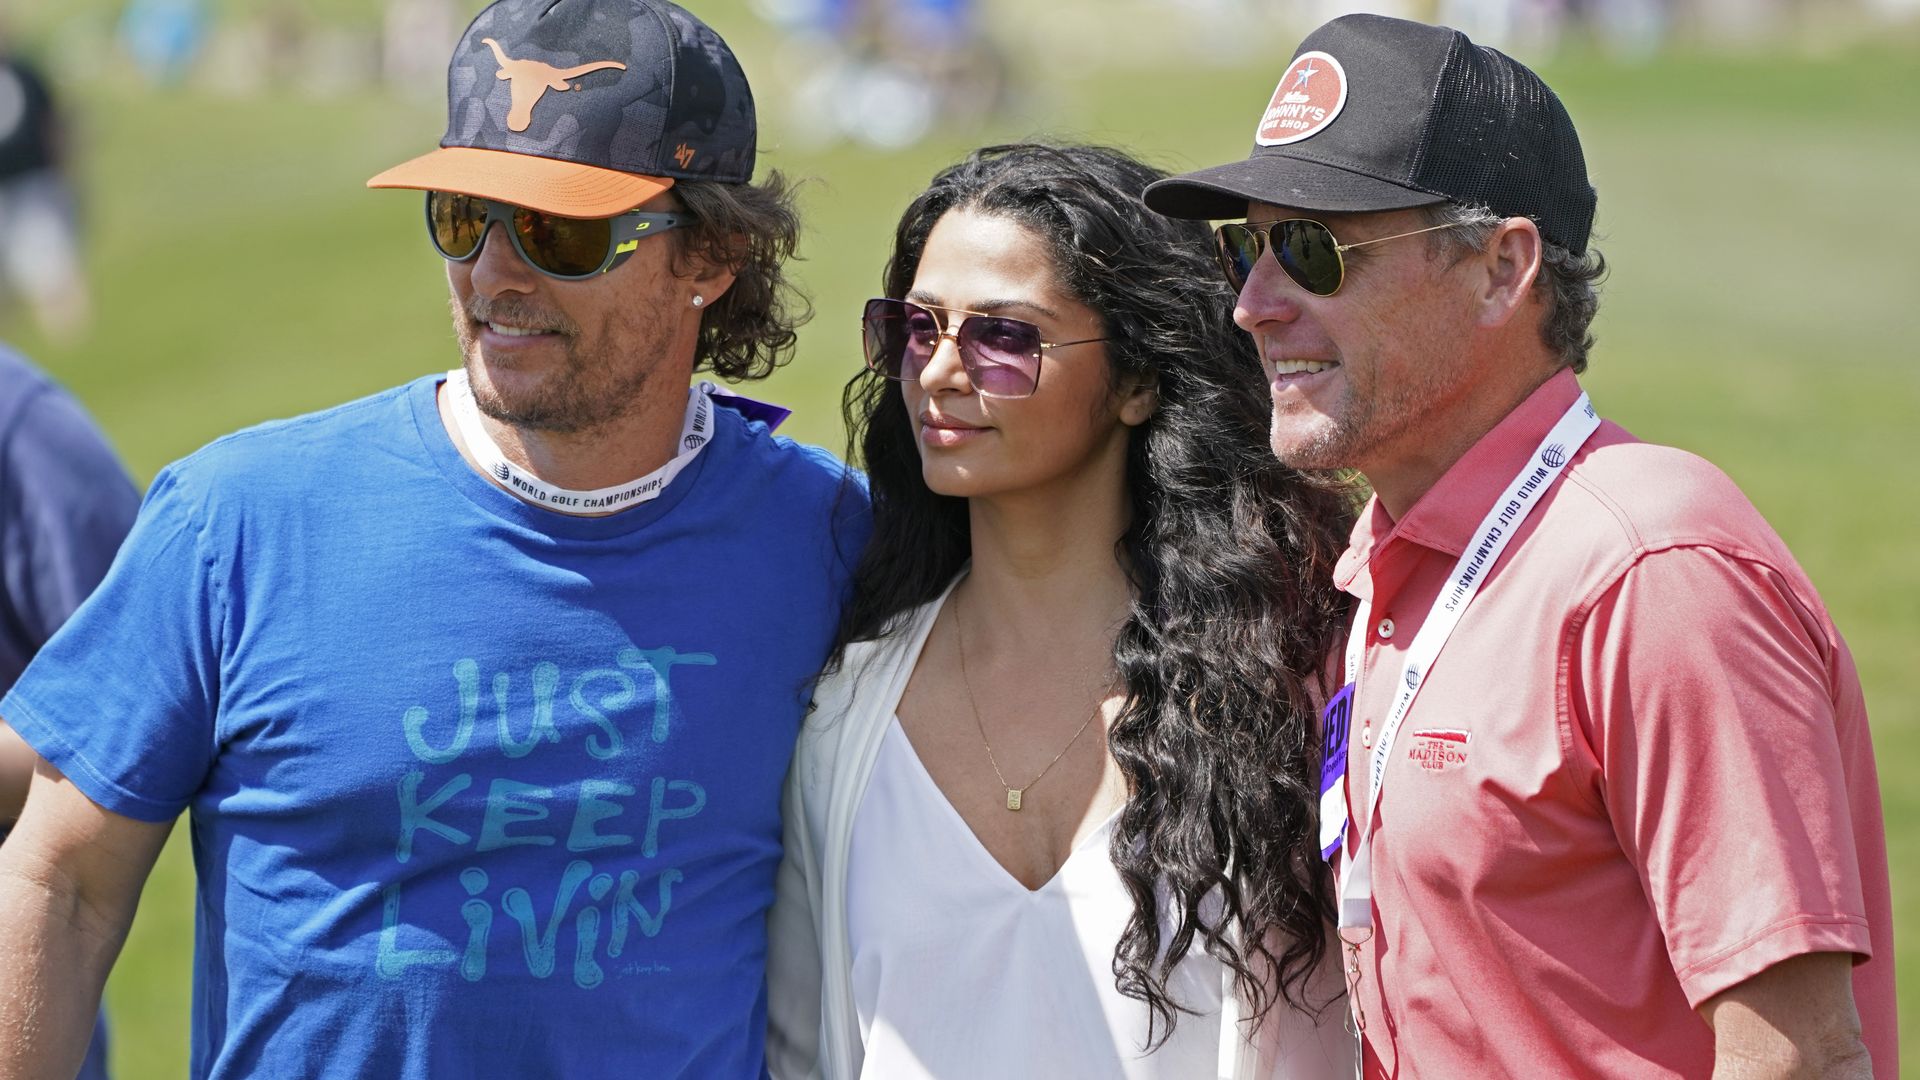 Matthew McConaughey, his wife Camila, and Lance Armstrong watch some golf during round two of the World Golf Championships in Austin in 2018.